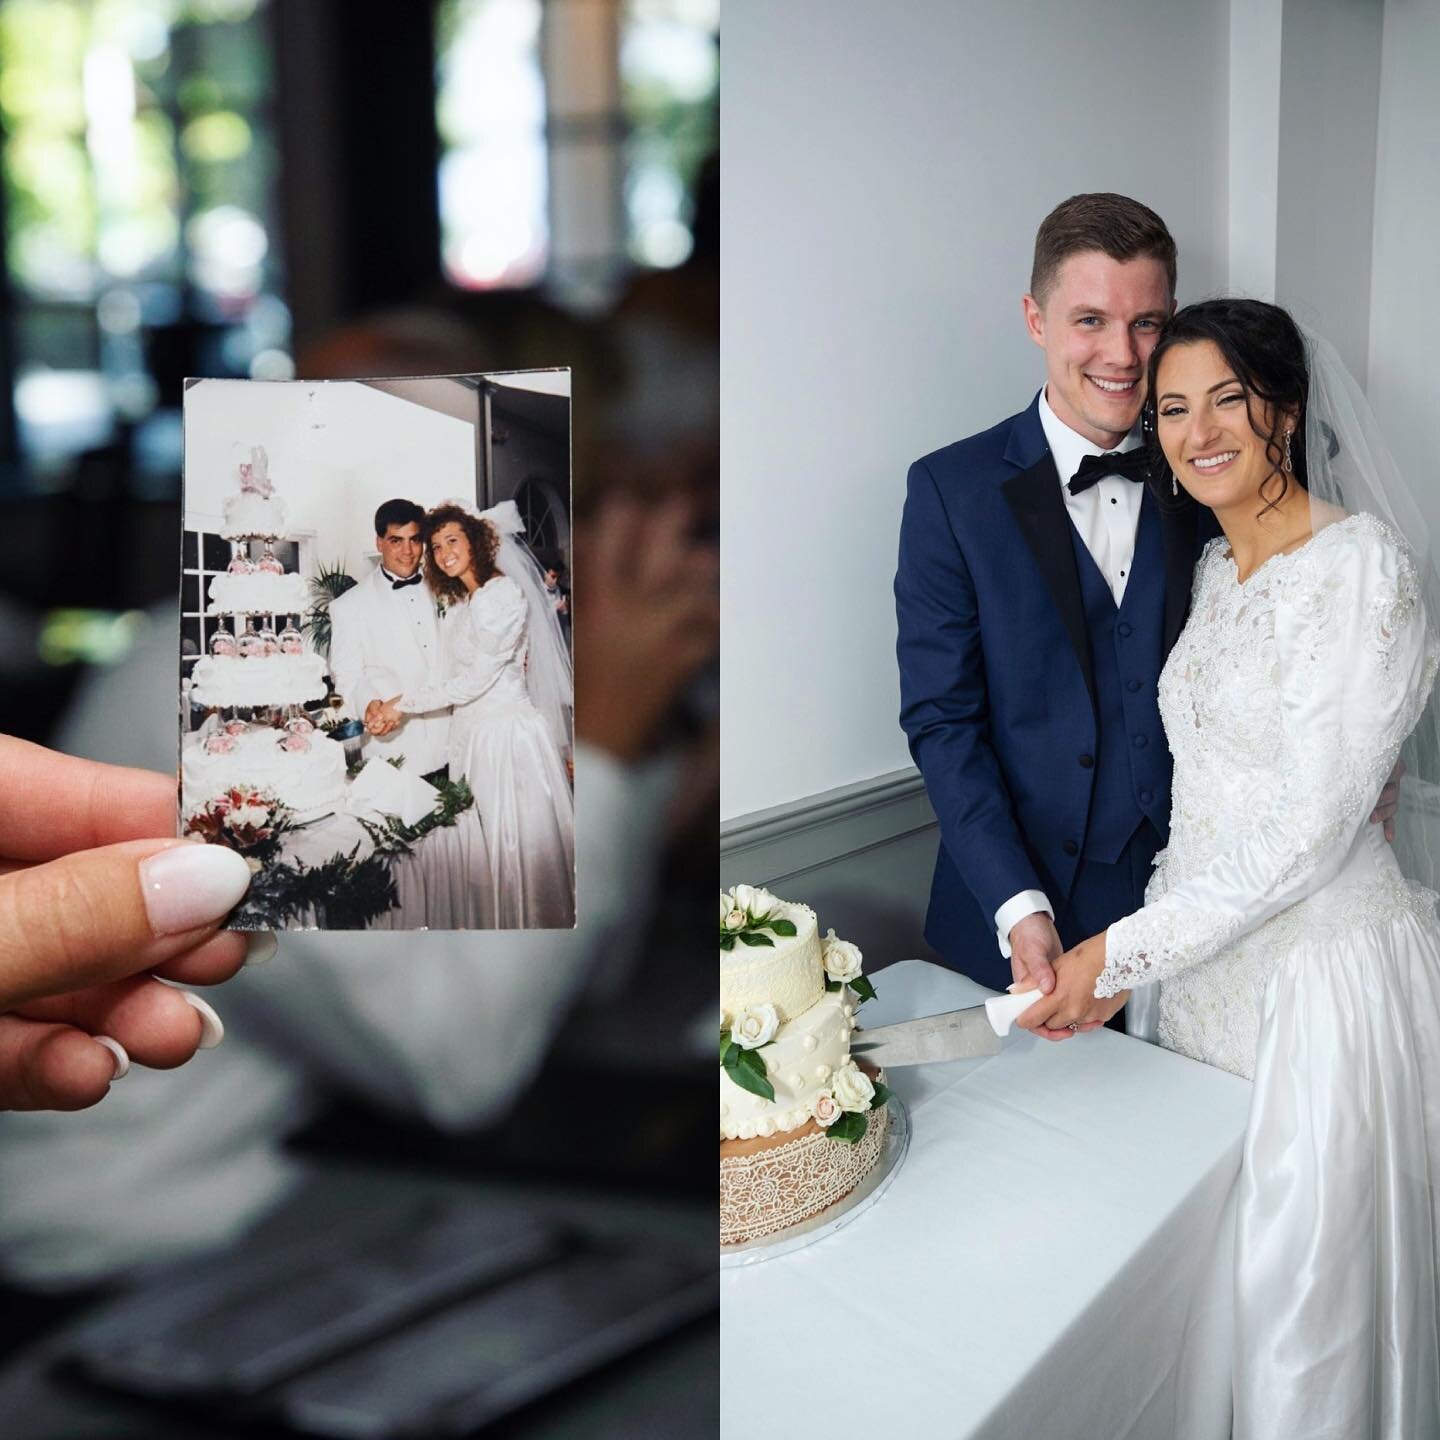 This wedding was rich with traditions. The bride wore her mother&rsquo;s wedding dress and we recreated her parents&rsquo; wedding photo during the reception!
#somethingborrowed #somethingoldsomethingnew #ctweddingphotographer #ctwedding